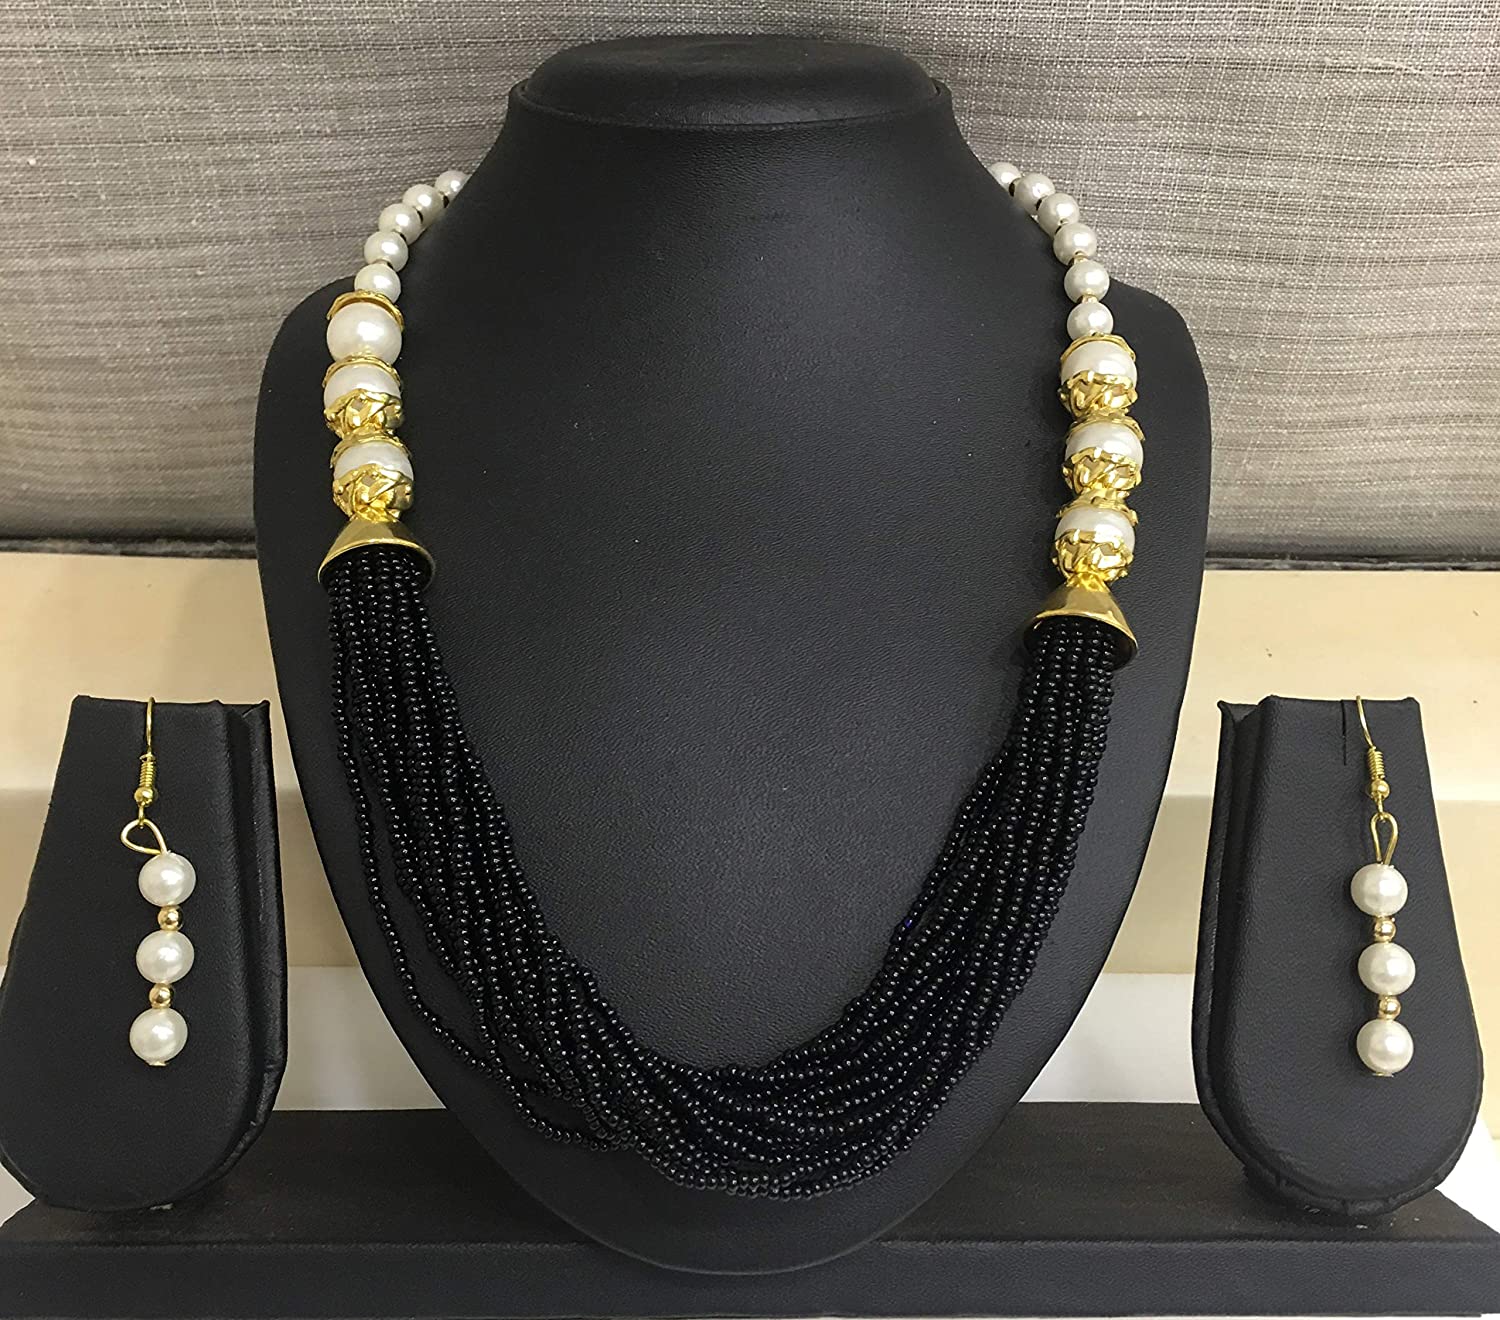 image for Coloured Beads and White Pearls with Gold Work Necklace Earring Set for Women Girls Costume Fashion Artifical Imitation Jewellery